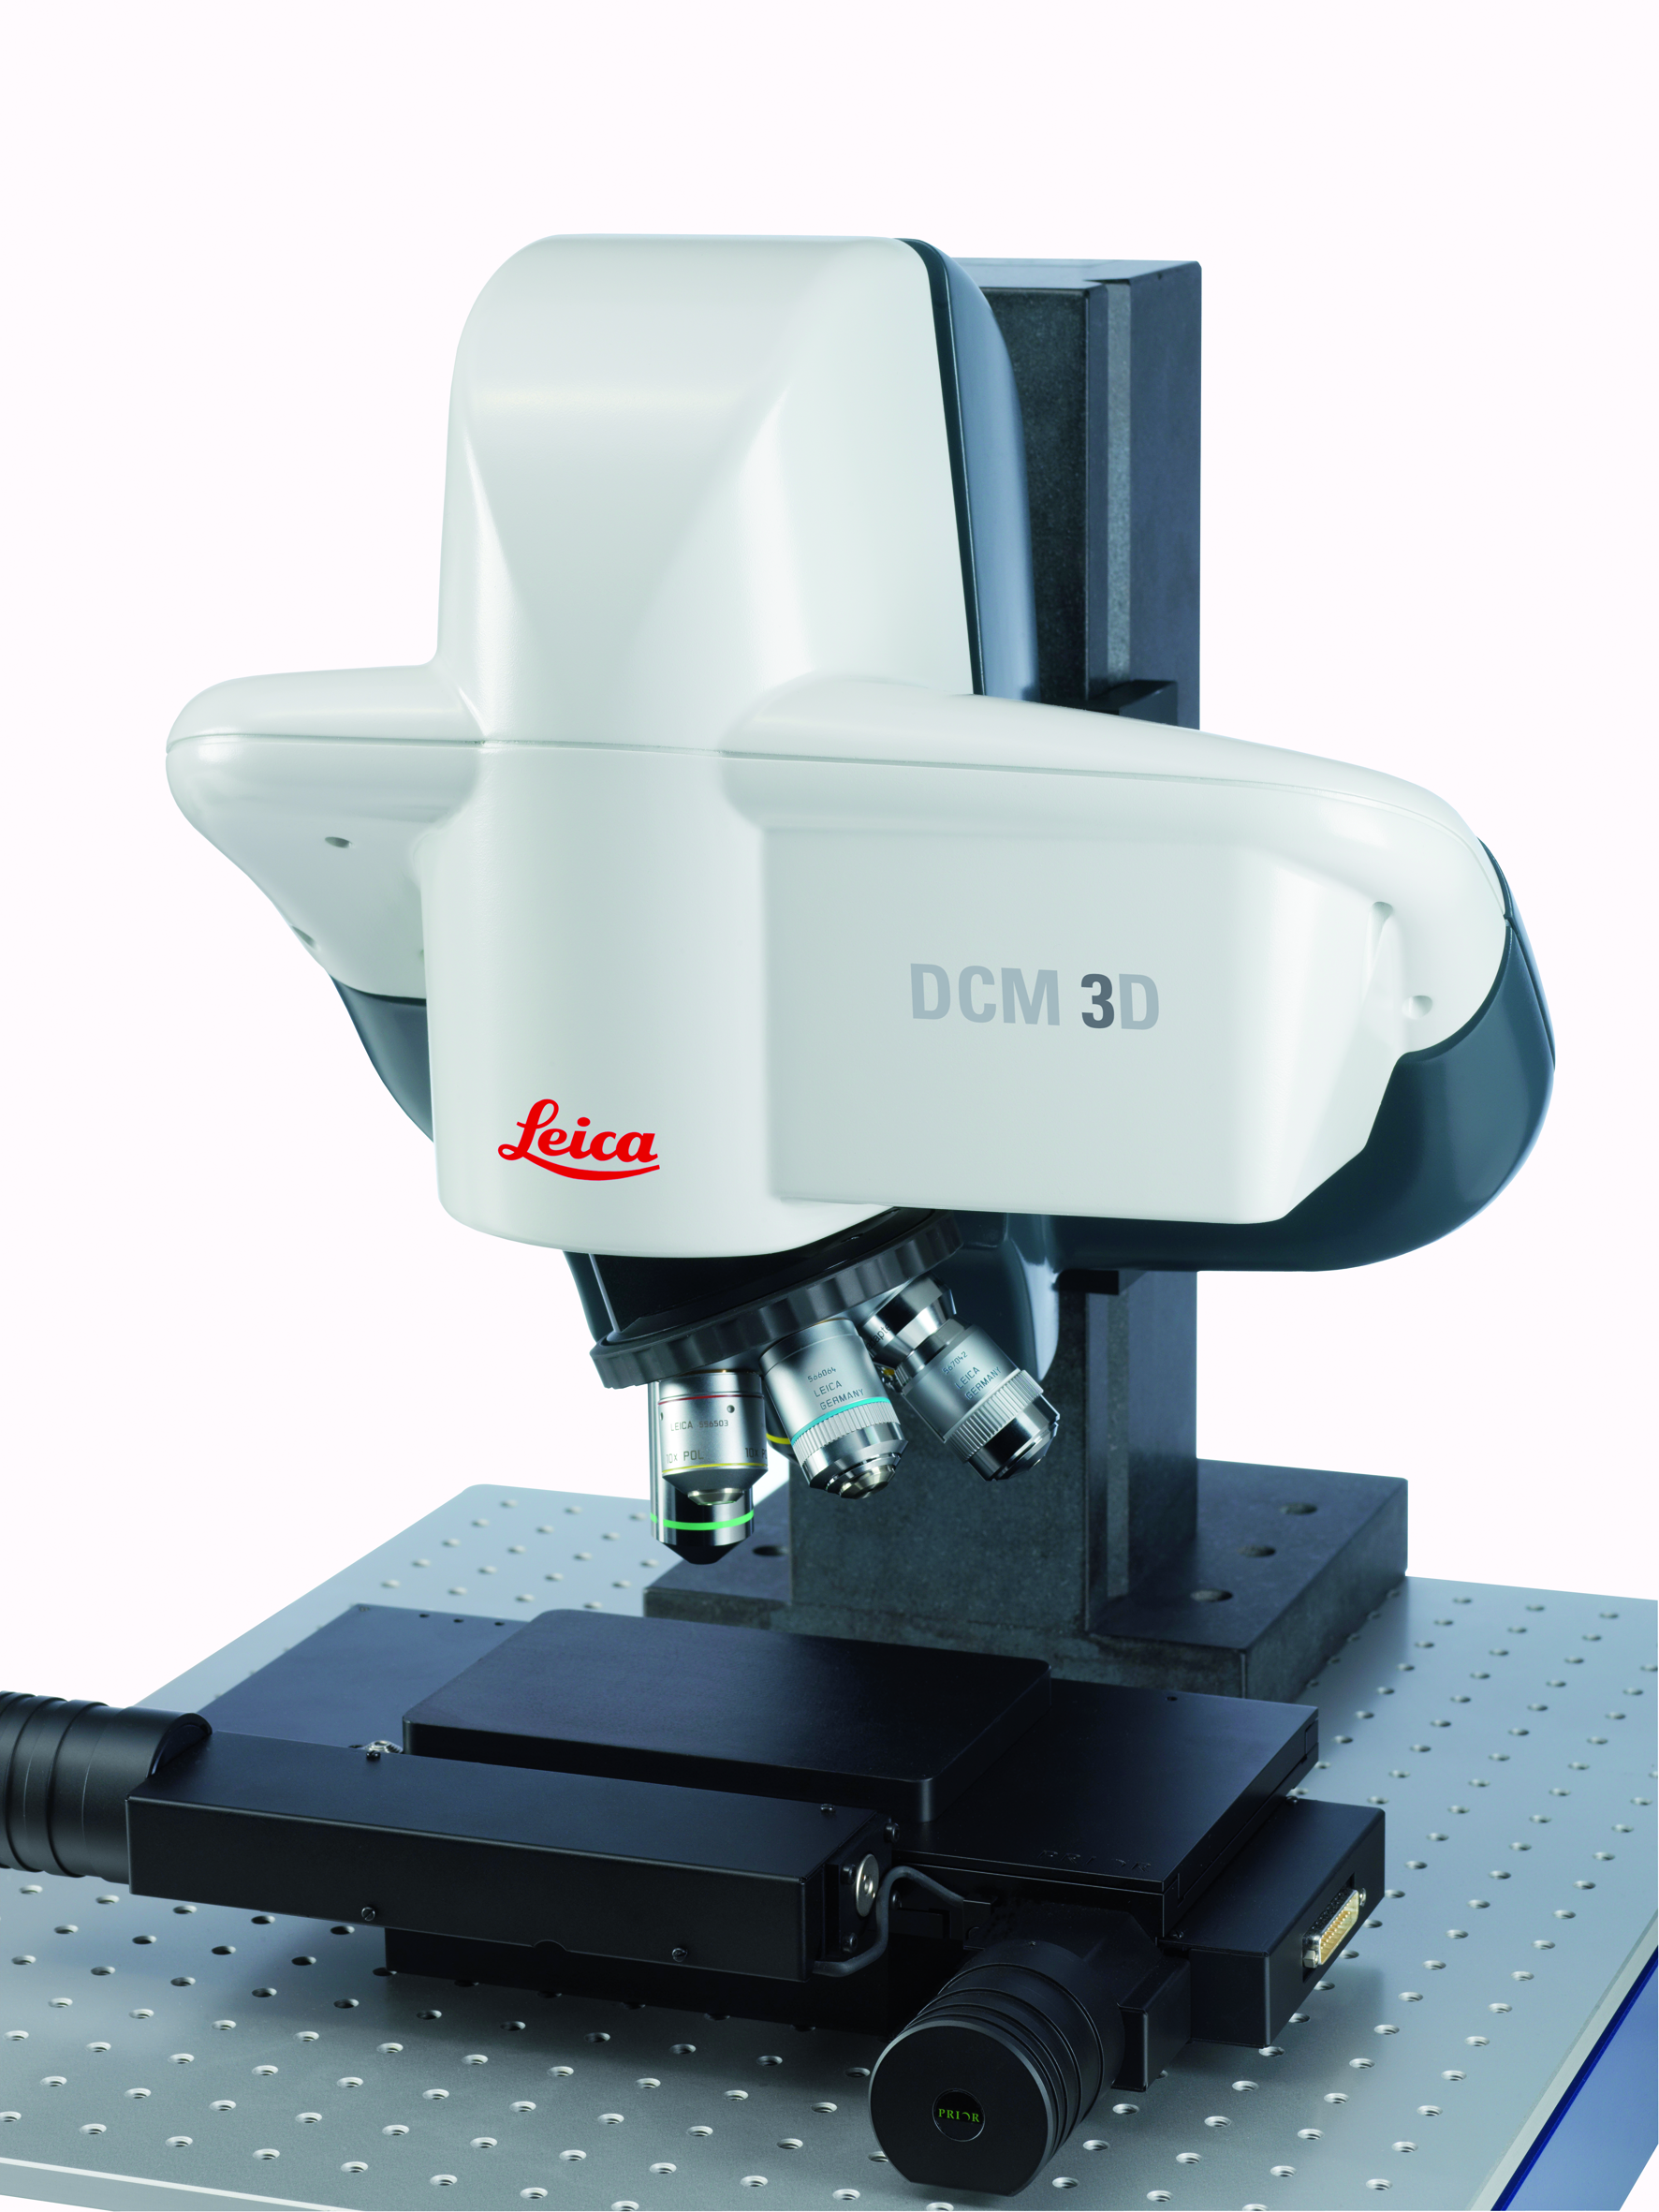 Confocal and interferometry technology for high speed, high-resolution measurements.